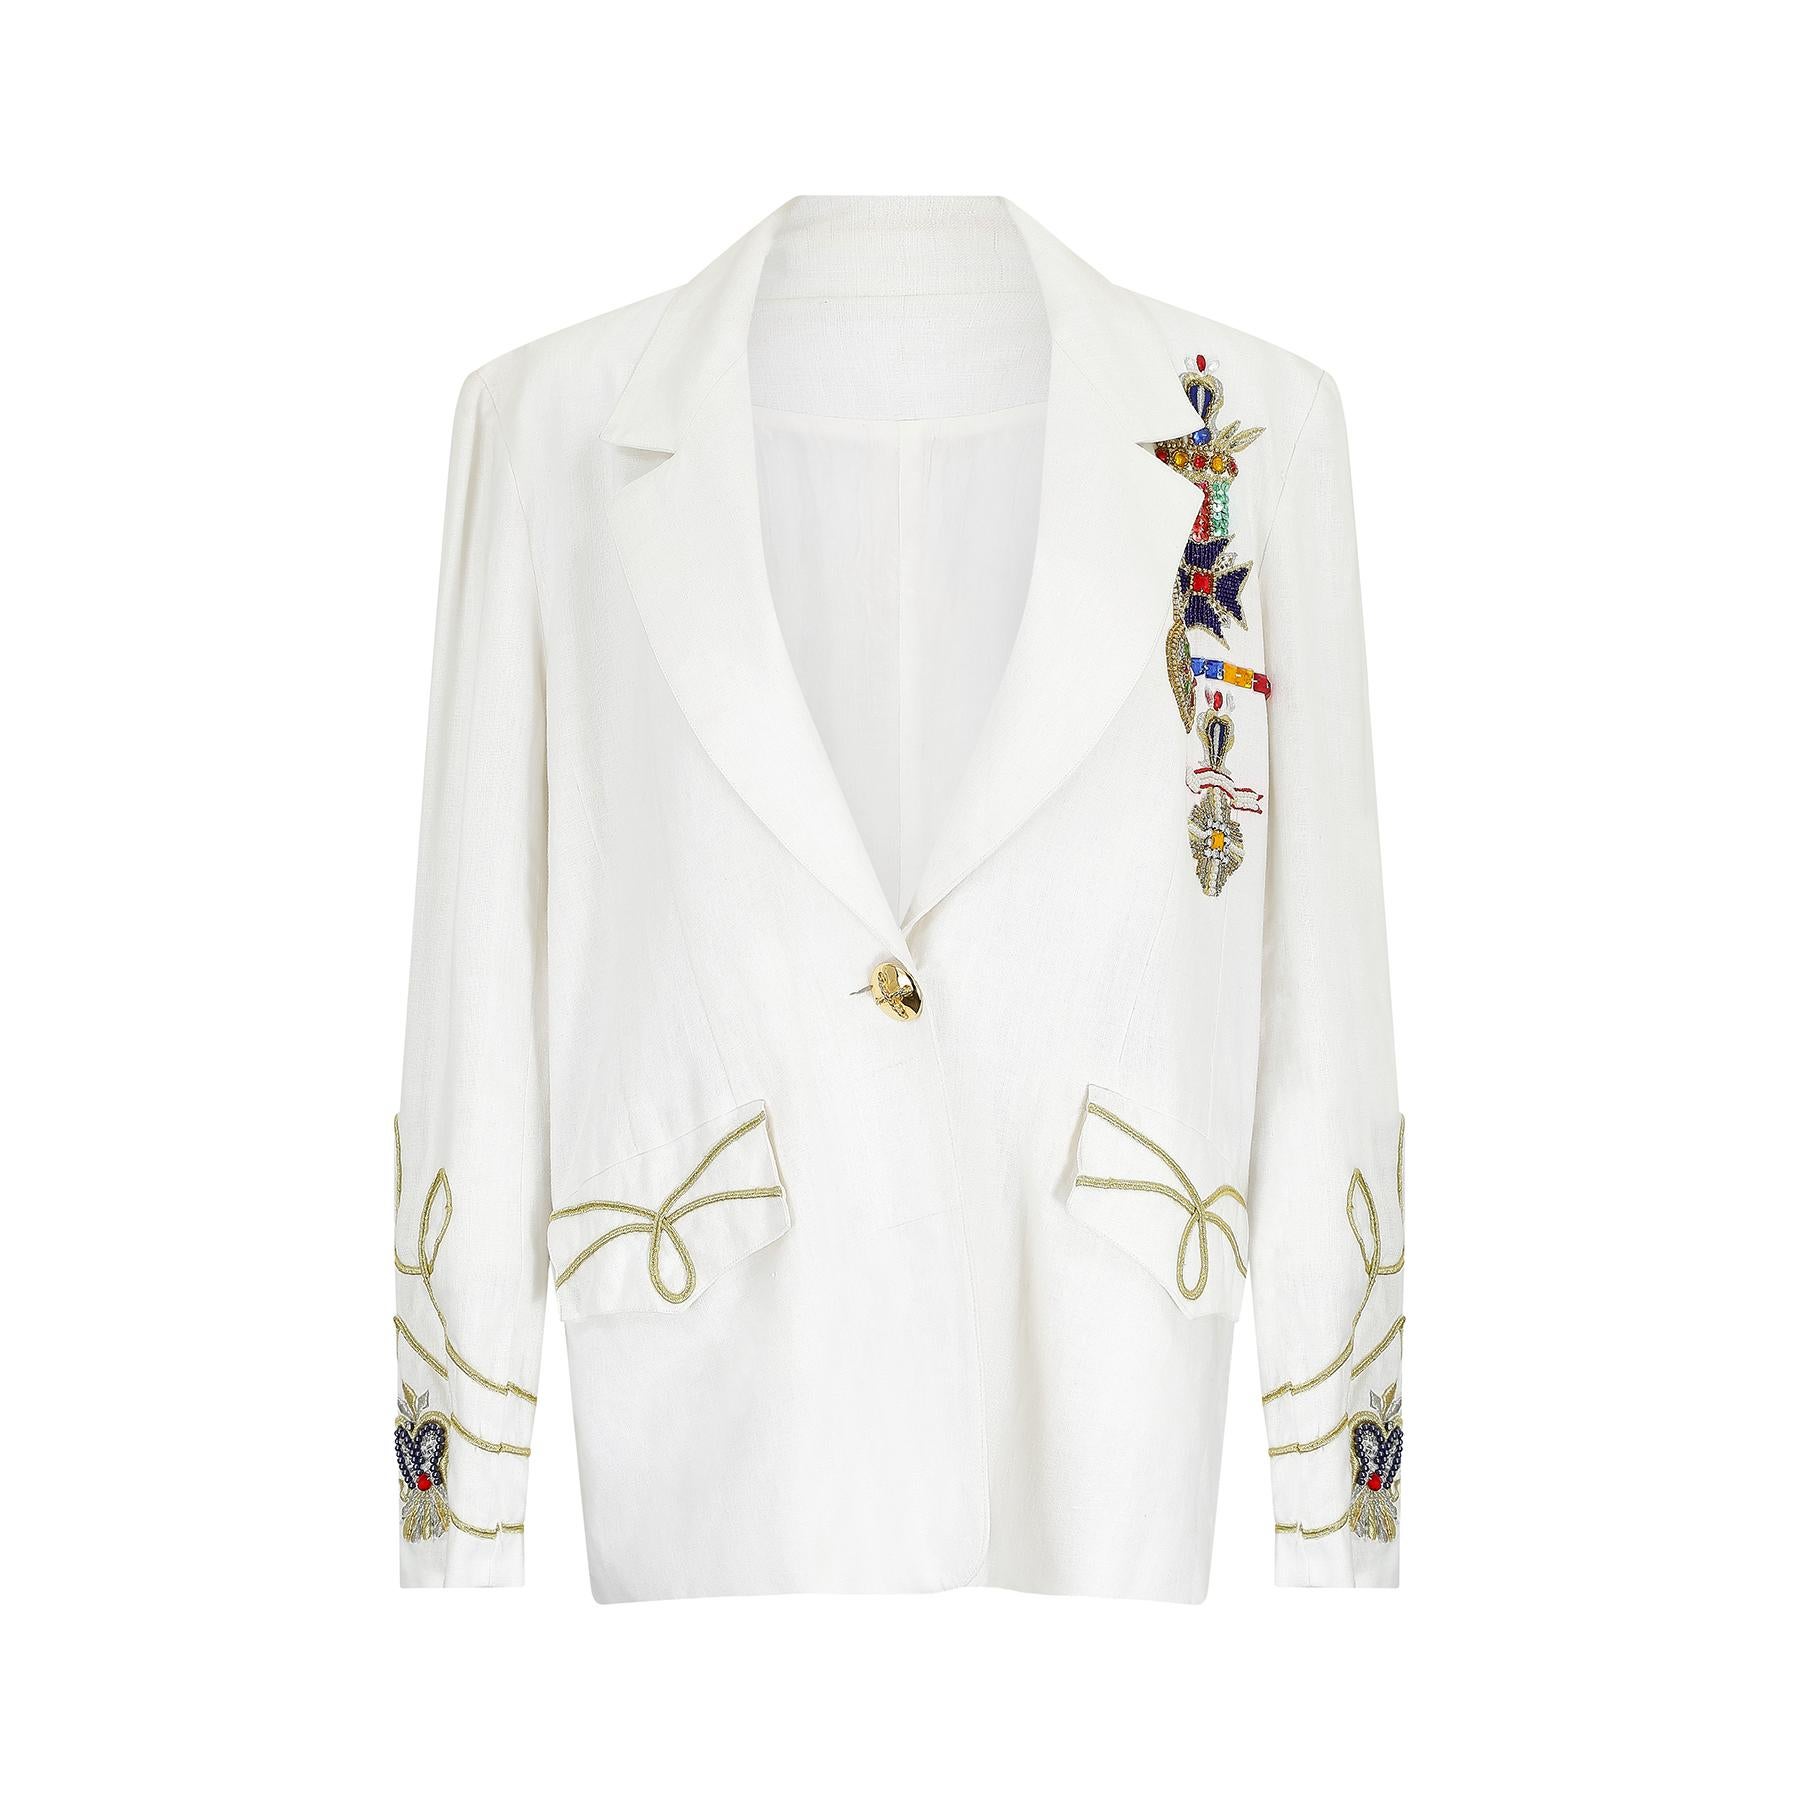 This late 1980s to early 1990s white linen novelty jacket was no doubt, inspired by the whimsical designs of Moschino and Versace. This unusual design is a flamboyant take on military uniform and features a dazzling array of sequins and beads